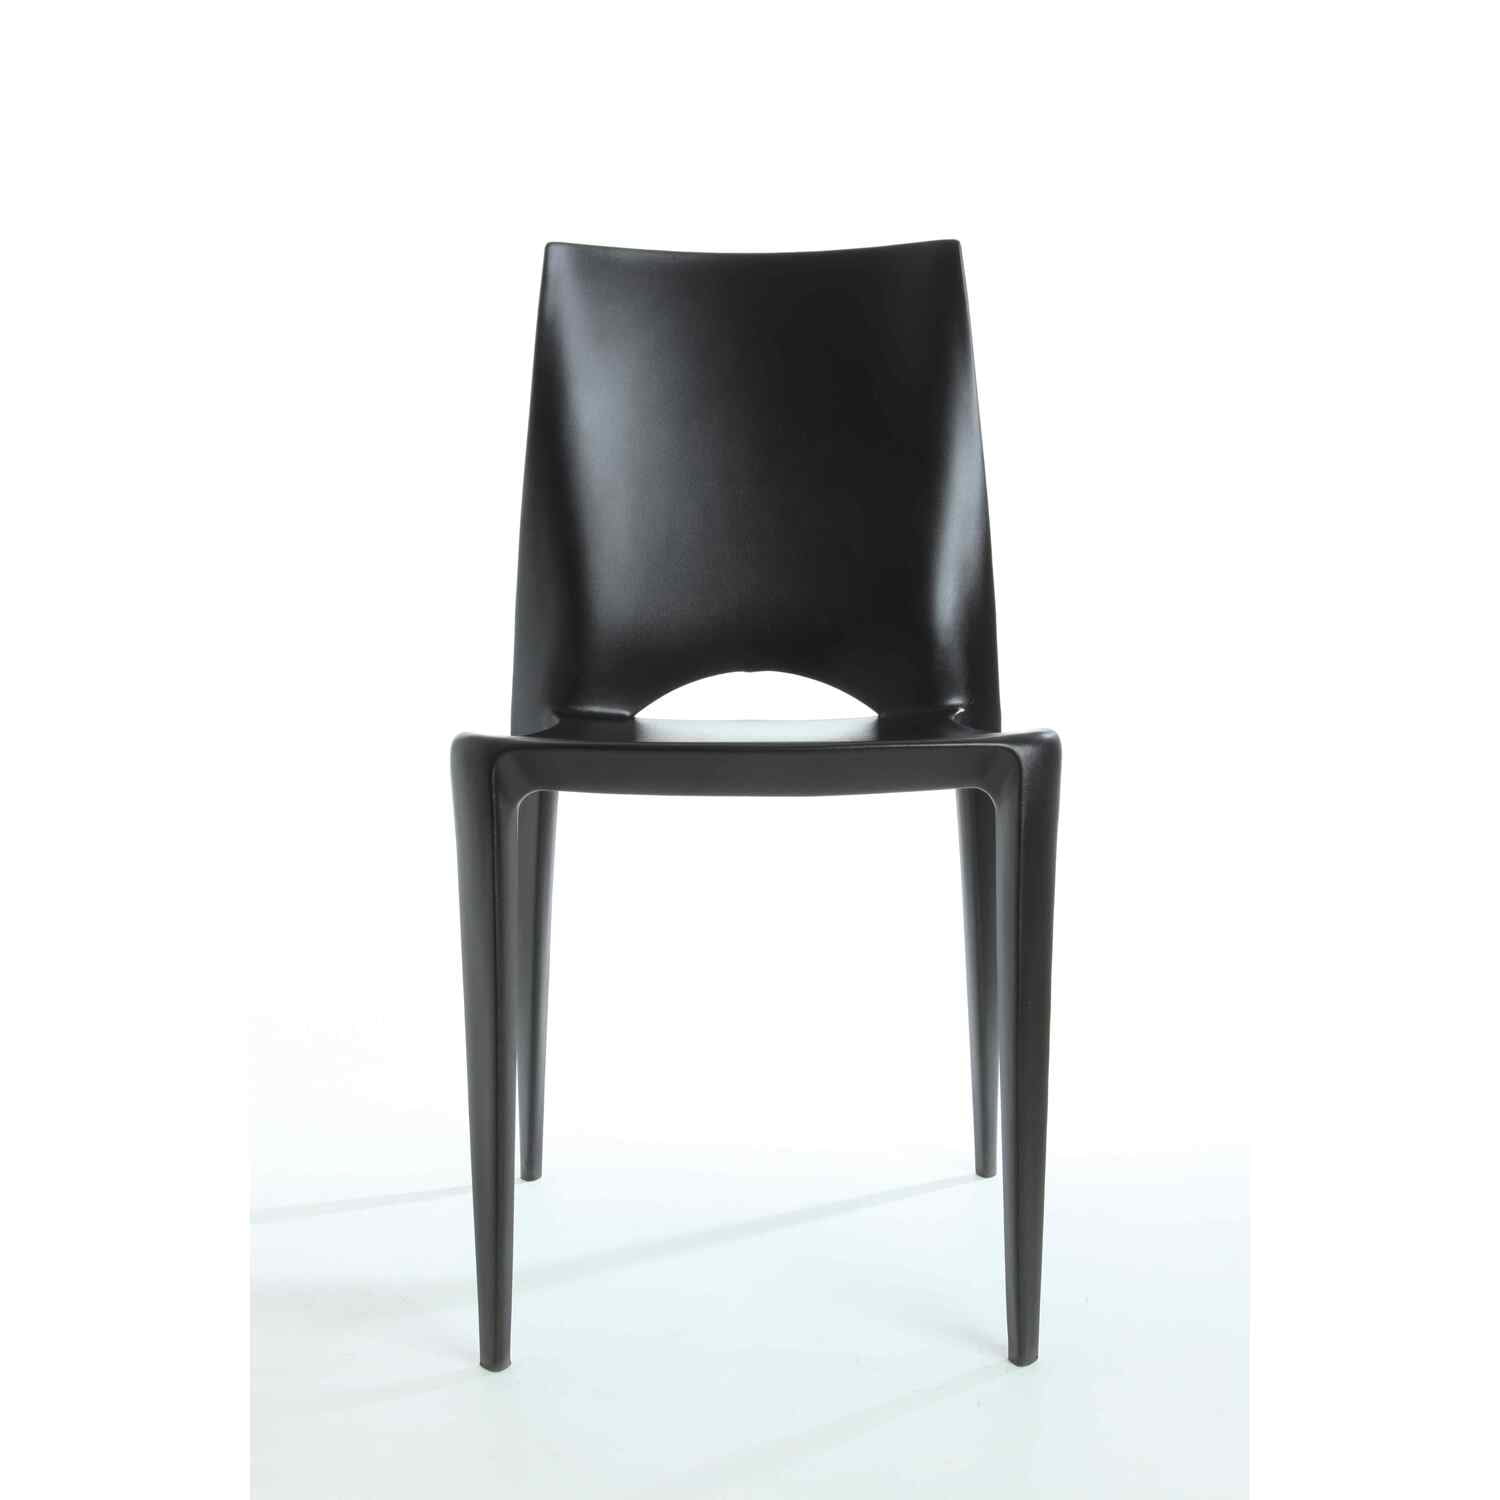 Rpp-crescent-bk Crescent Polyproplylene Stackable Chair - Black - 32 In.